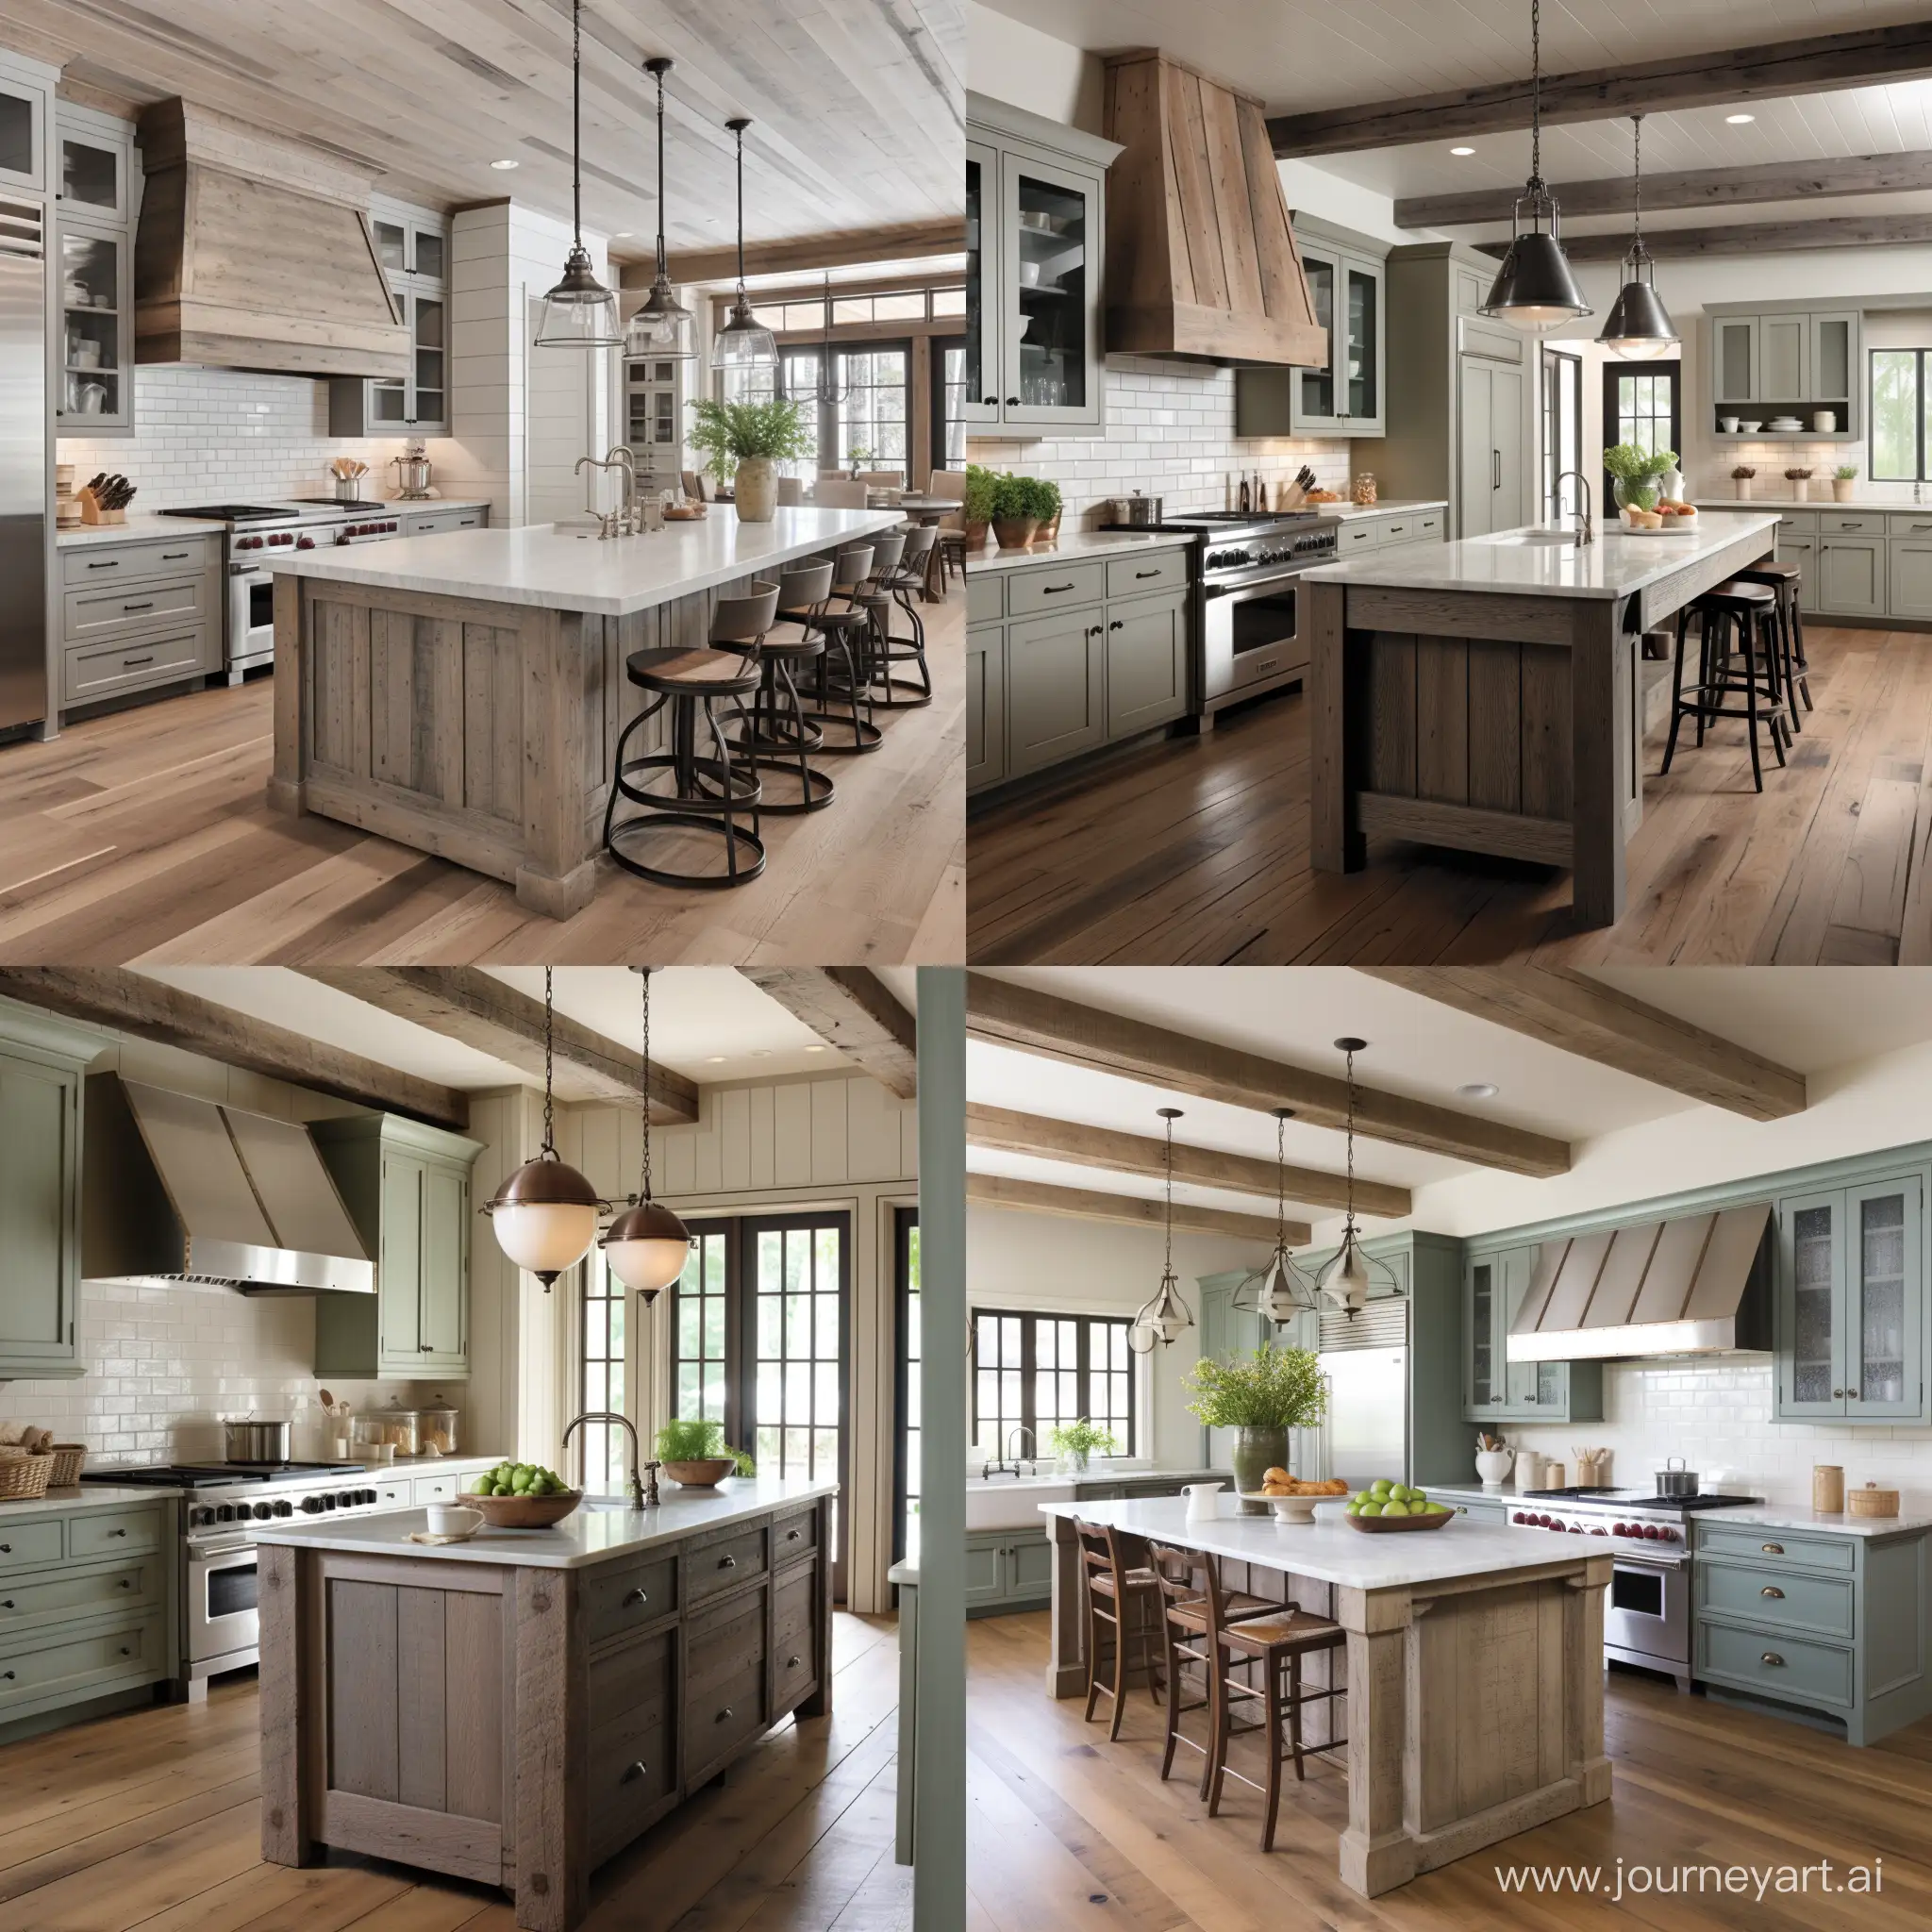 Rustic-Farmhouse-Kitchen-Cabinet-Color-Ideas-in-Wood